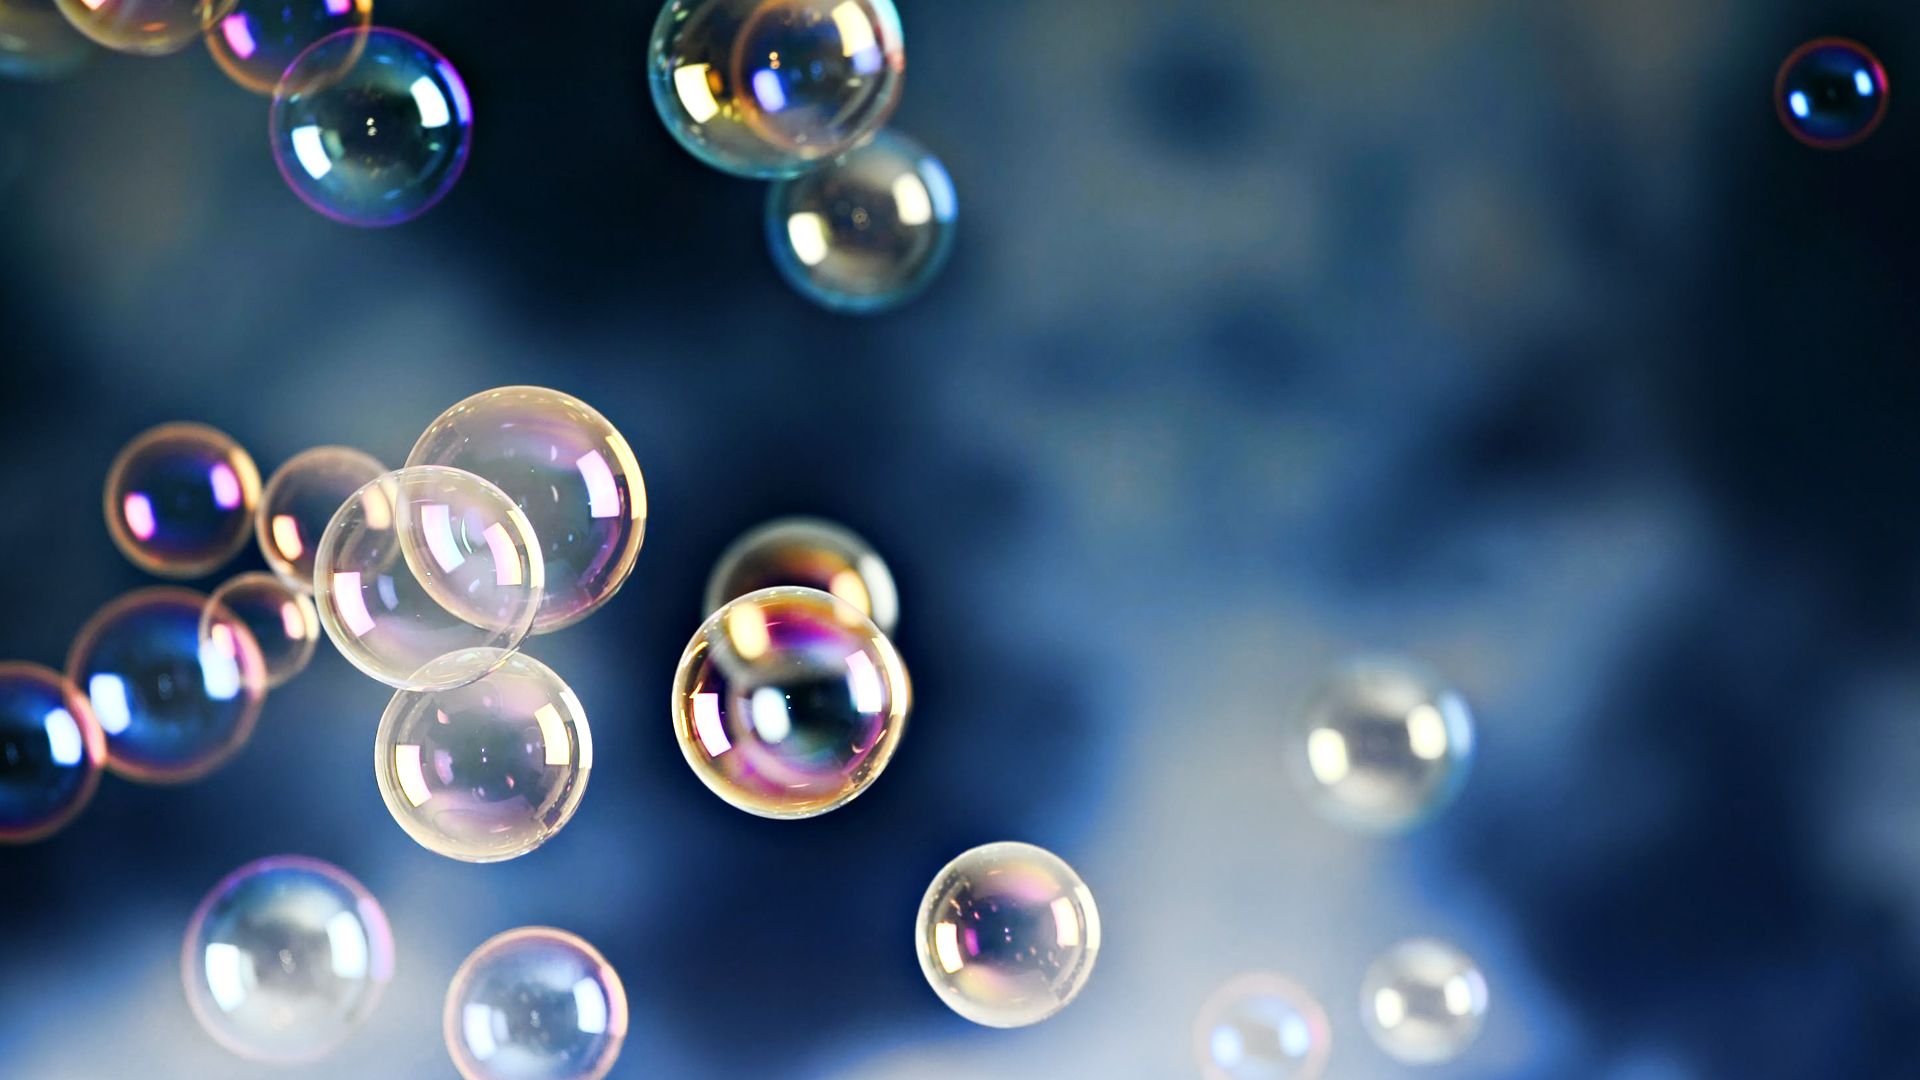 Lovely Bubbles Wallpapers.